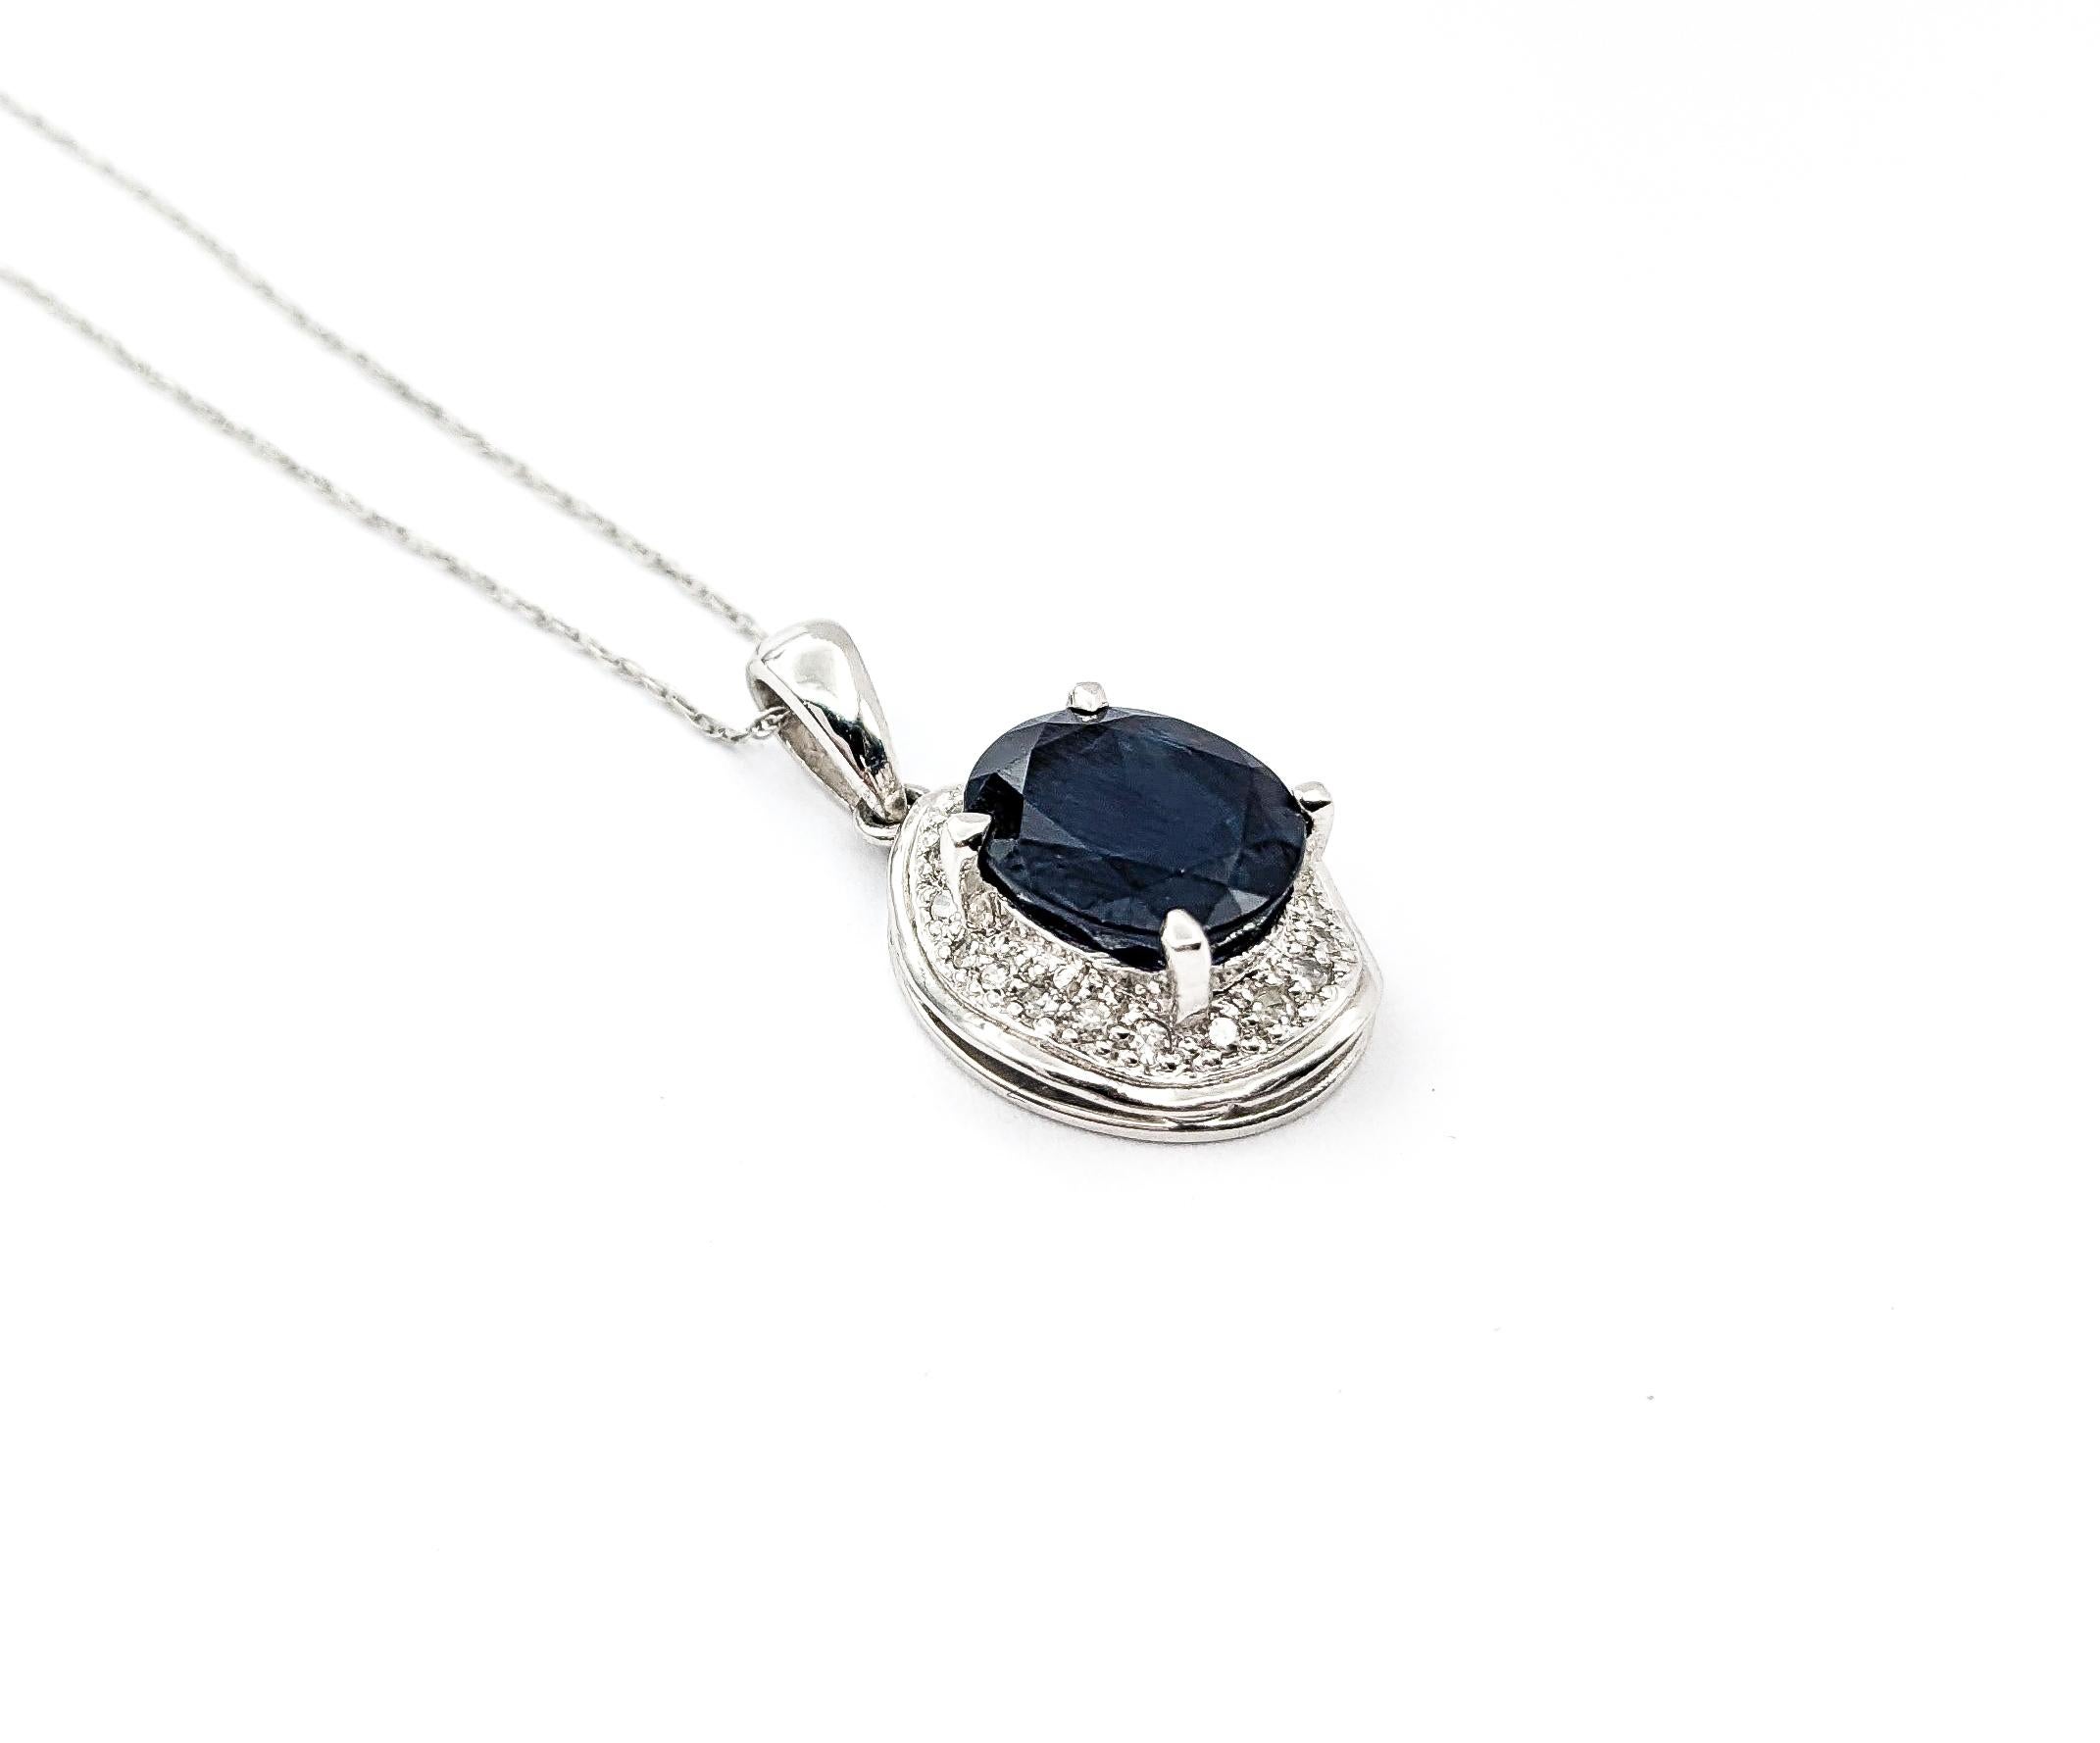 3ct Blue Sapphire & Diamond Pendant In Platinum W/chain


Introducing this remarkable Gemstone Fashion Pendant, expertly crafted in 900pt platinum. This pendant is designed in an elegant drop style and showcases a stunning 0.21ctw of diamonds